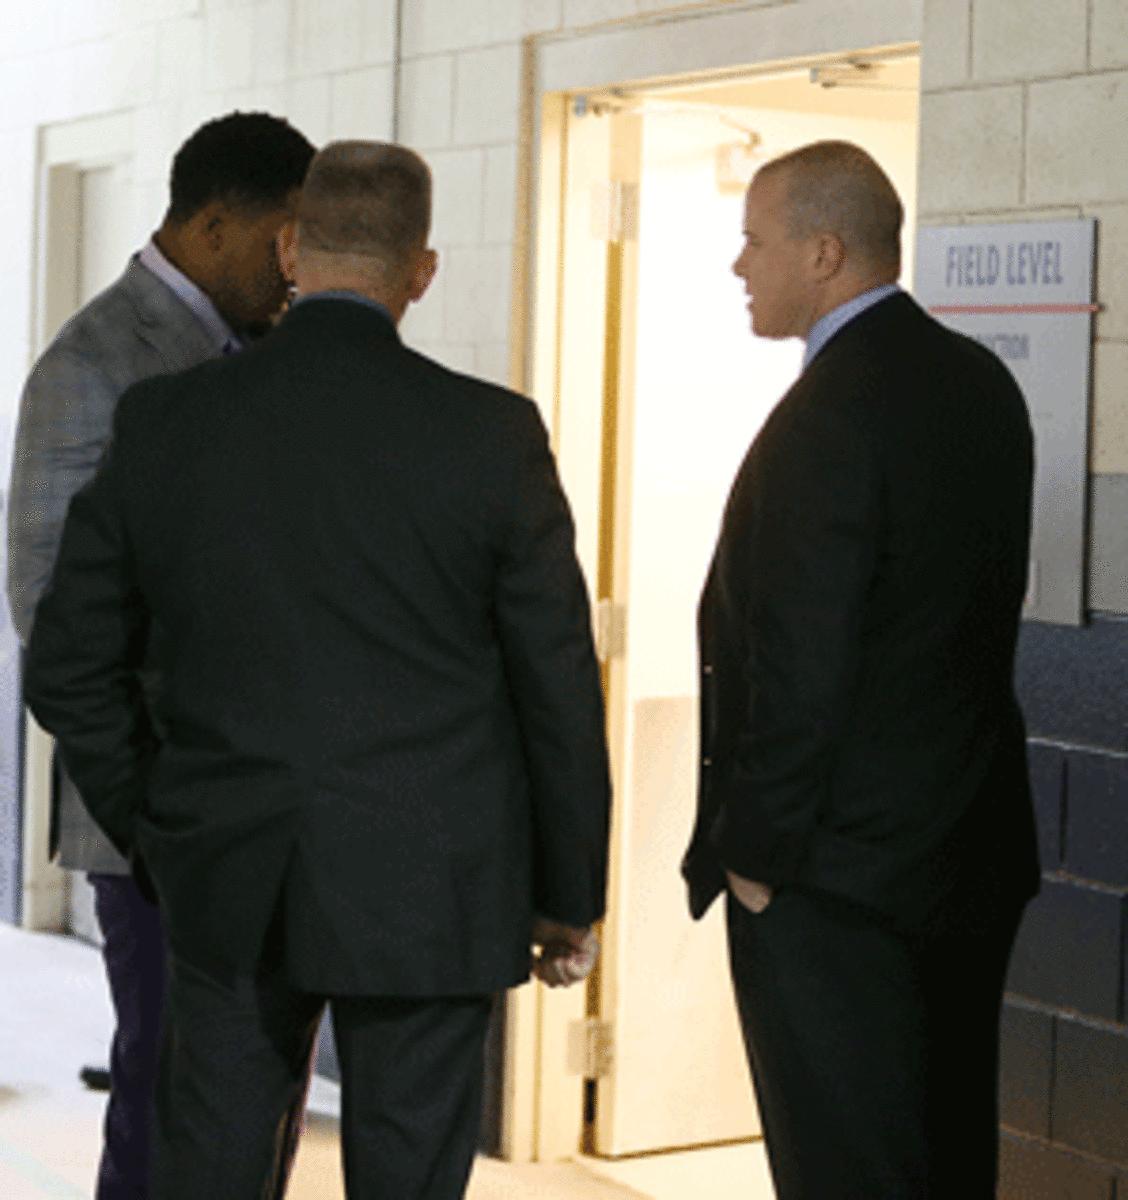 Massachusetts State Police surprised Dolphins center Mike Pouncey (in gray jacket) with a grand jury subpoena after Sunday's game with the Patriots in Foxborough, Mass.